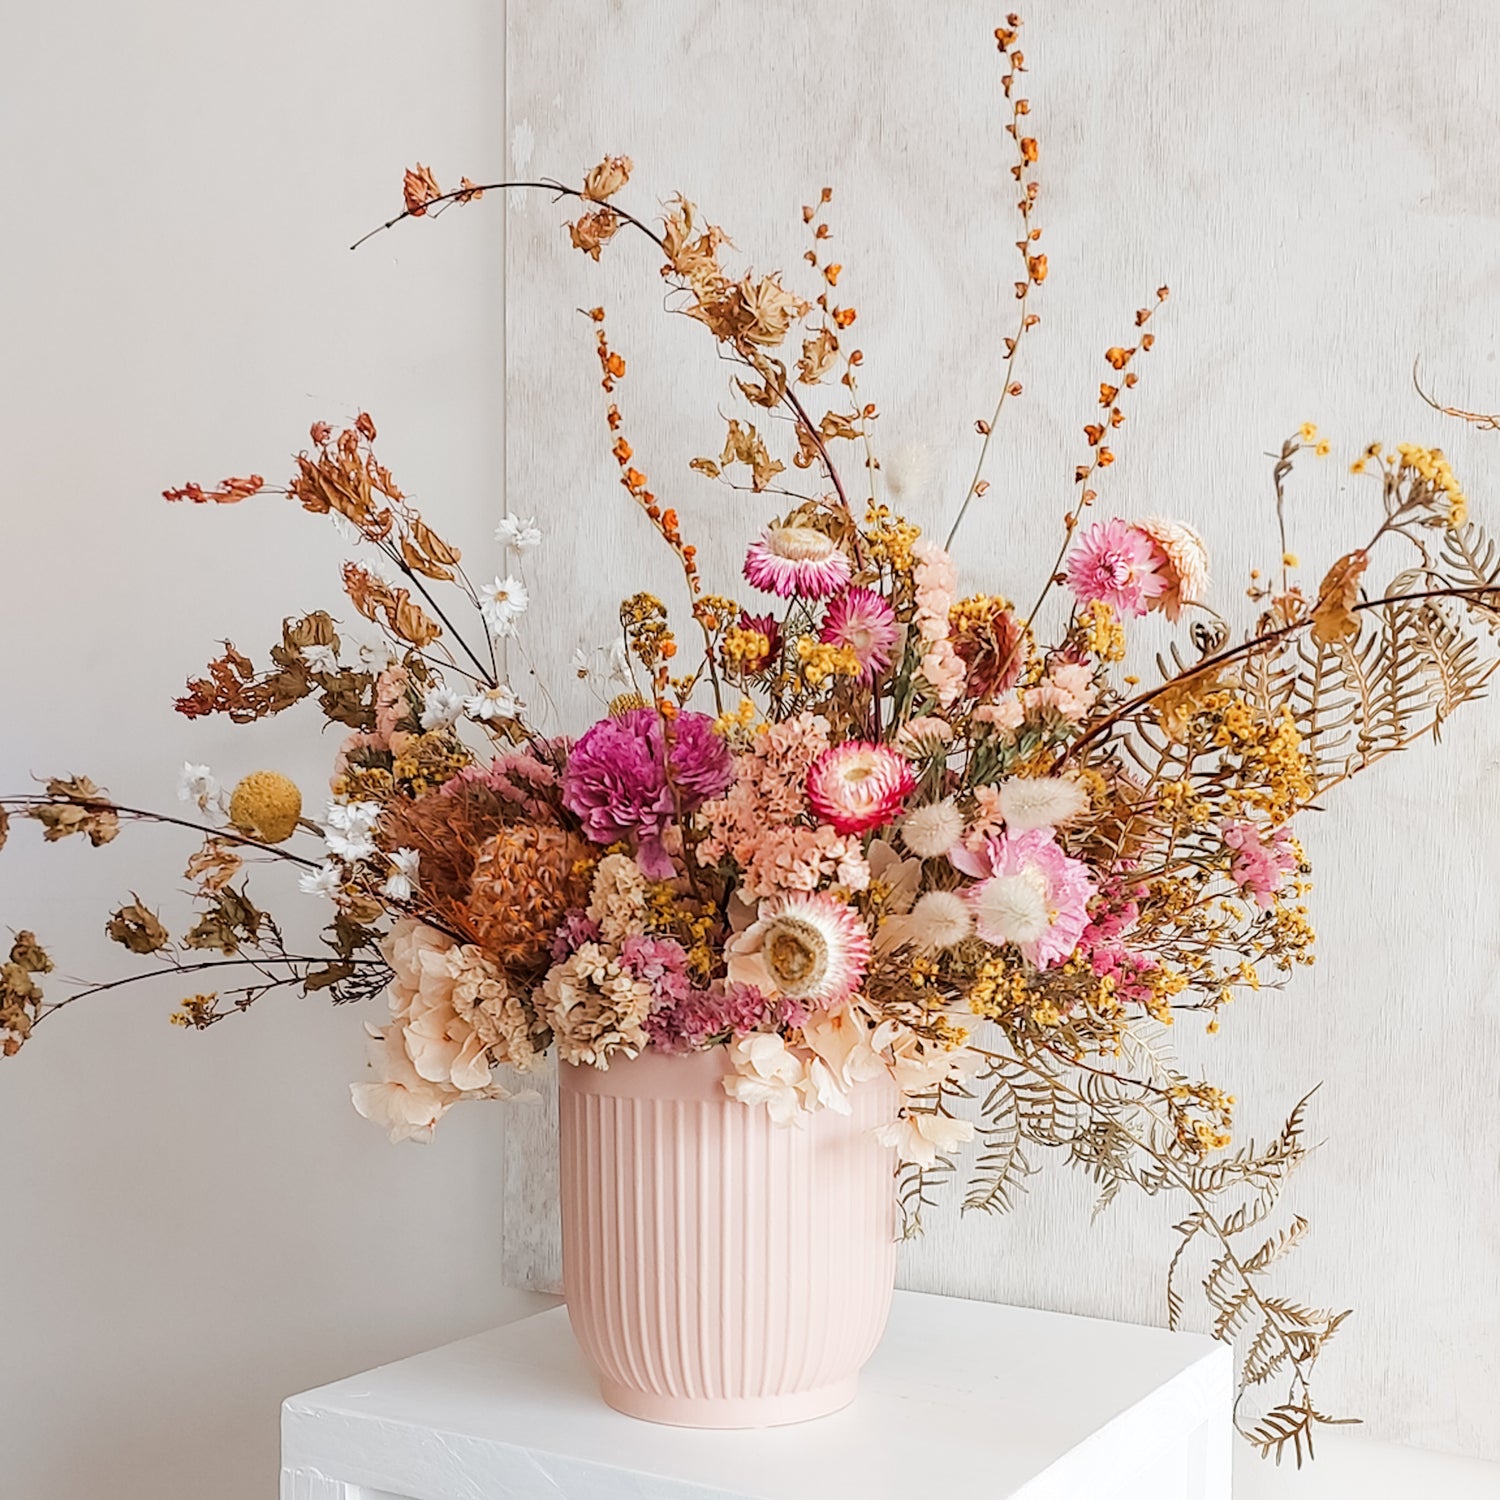 Dried flower arrangement in a bright colourful palette in a nude ceramic vase.